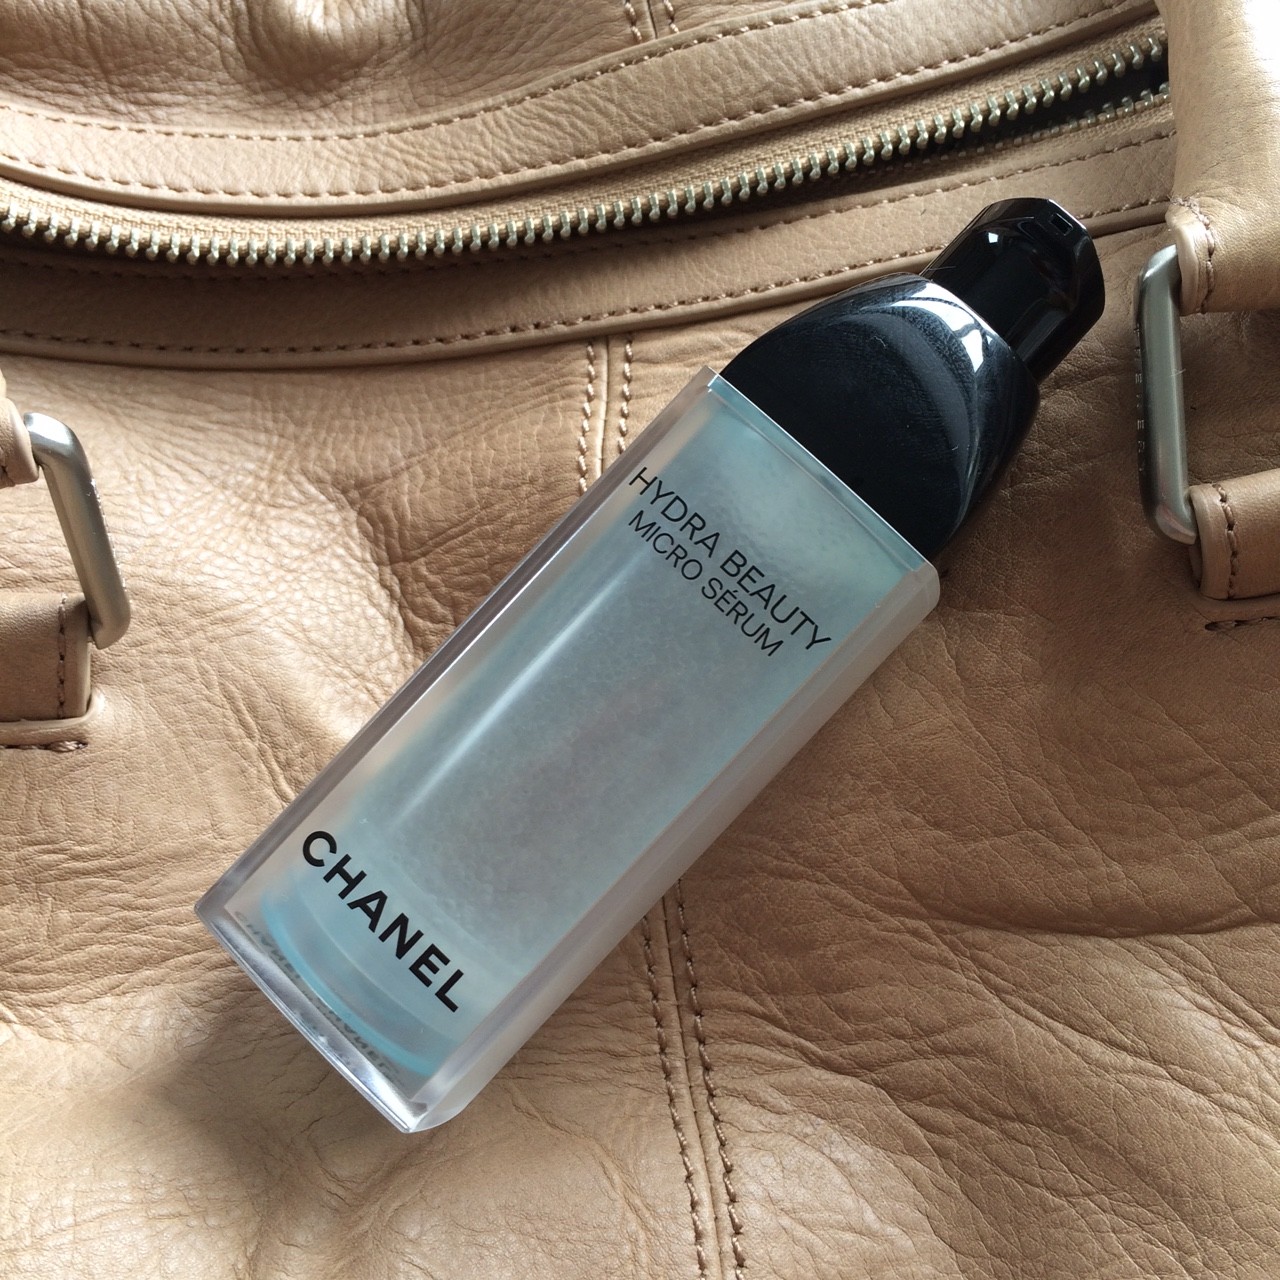 CHANEL HYDRA BEAUTY MICRO SERUM REVIEW – In My Bag